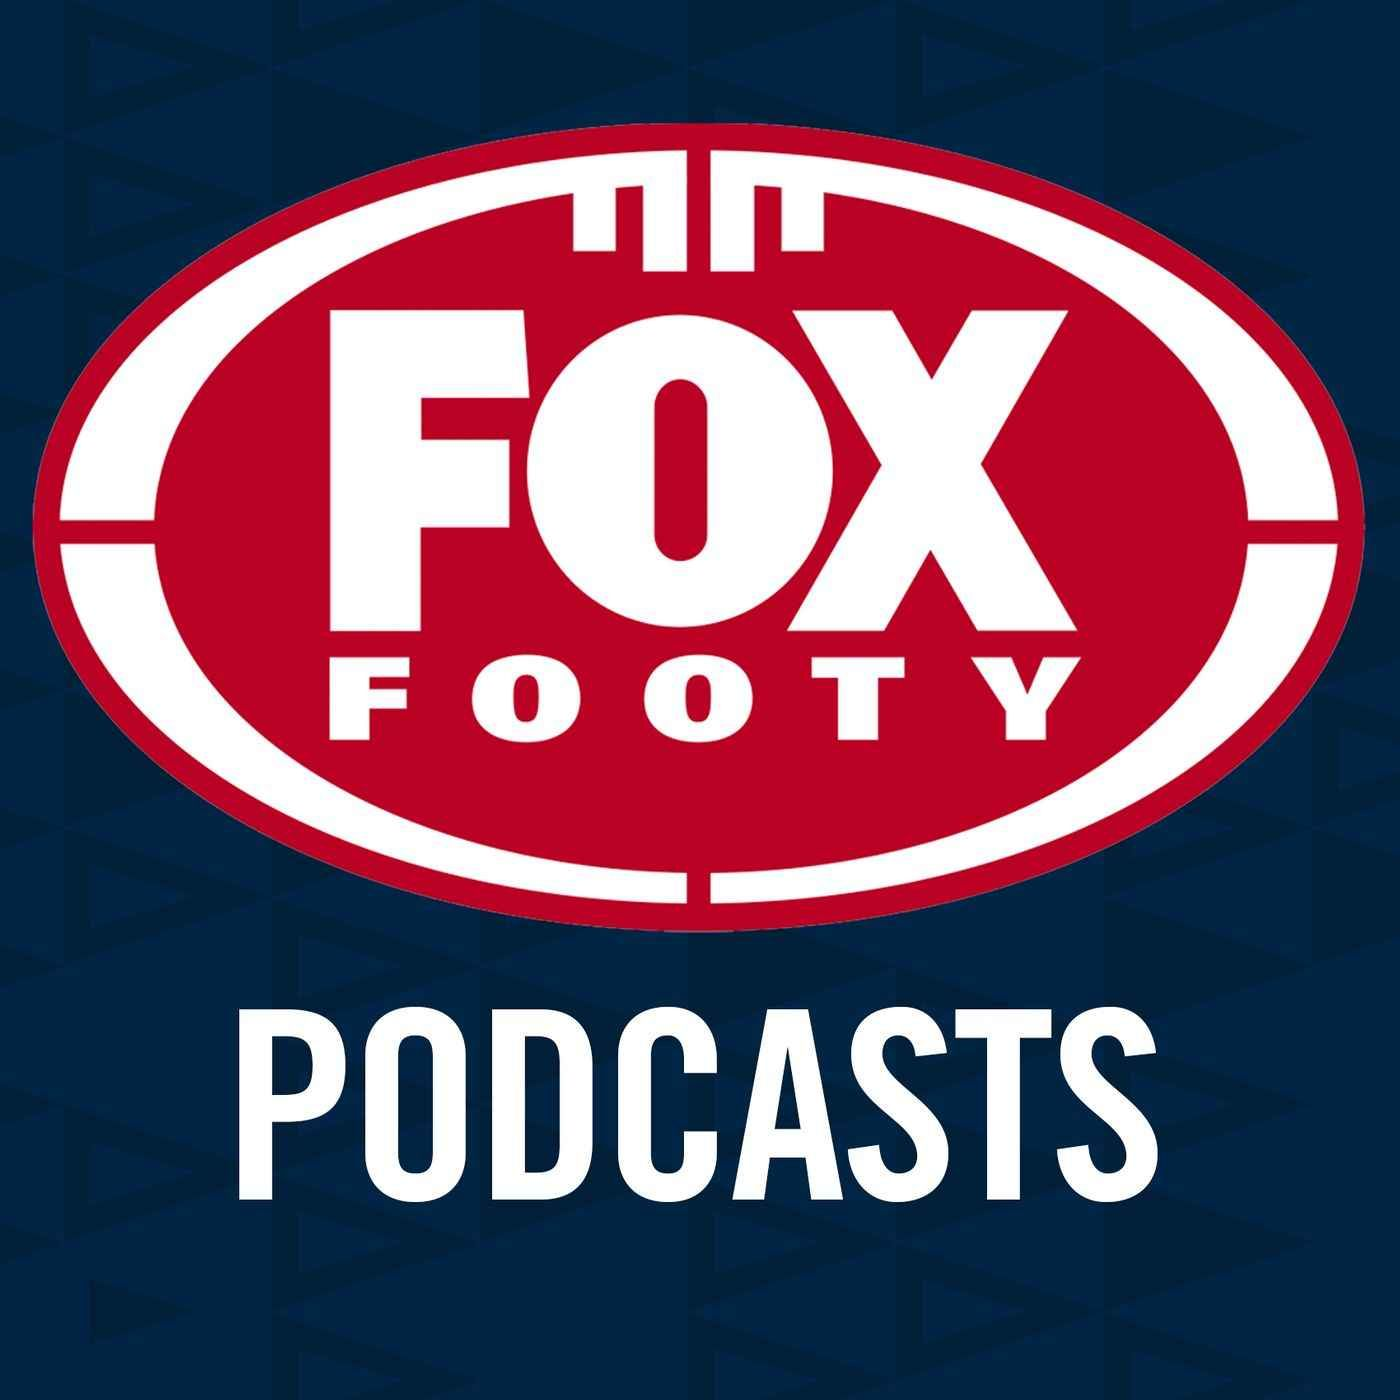 Fox Footy Live: former AFLPA President Matthew Pavlich speaks about what the players will be discussing